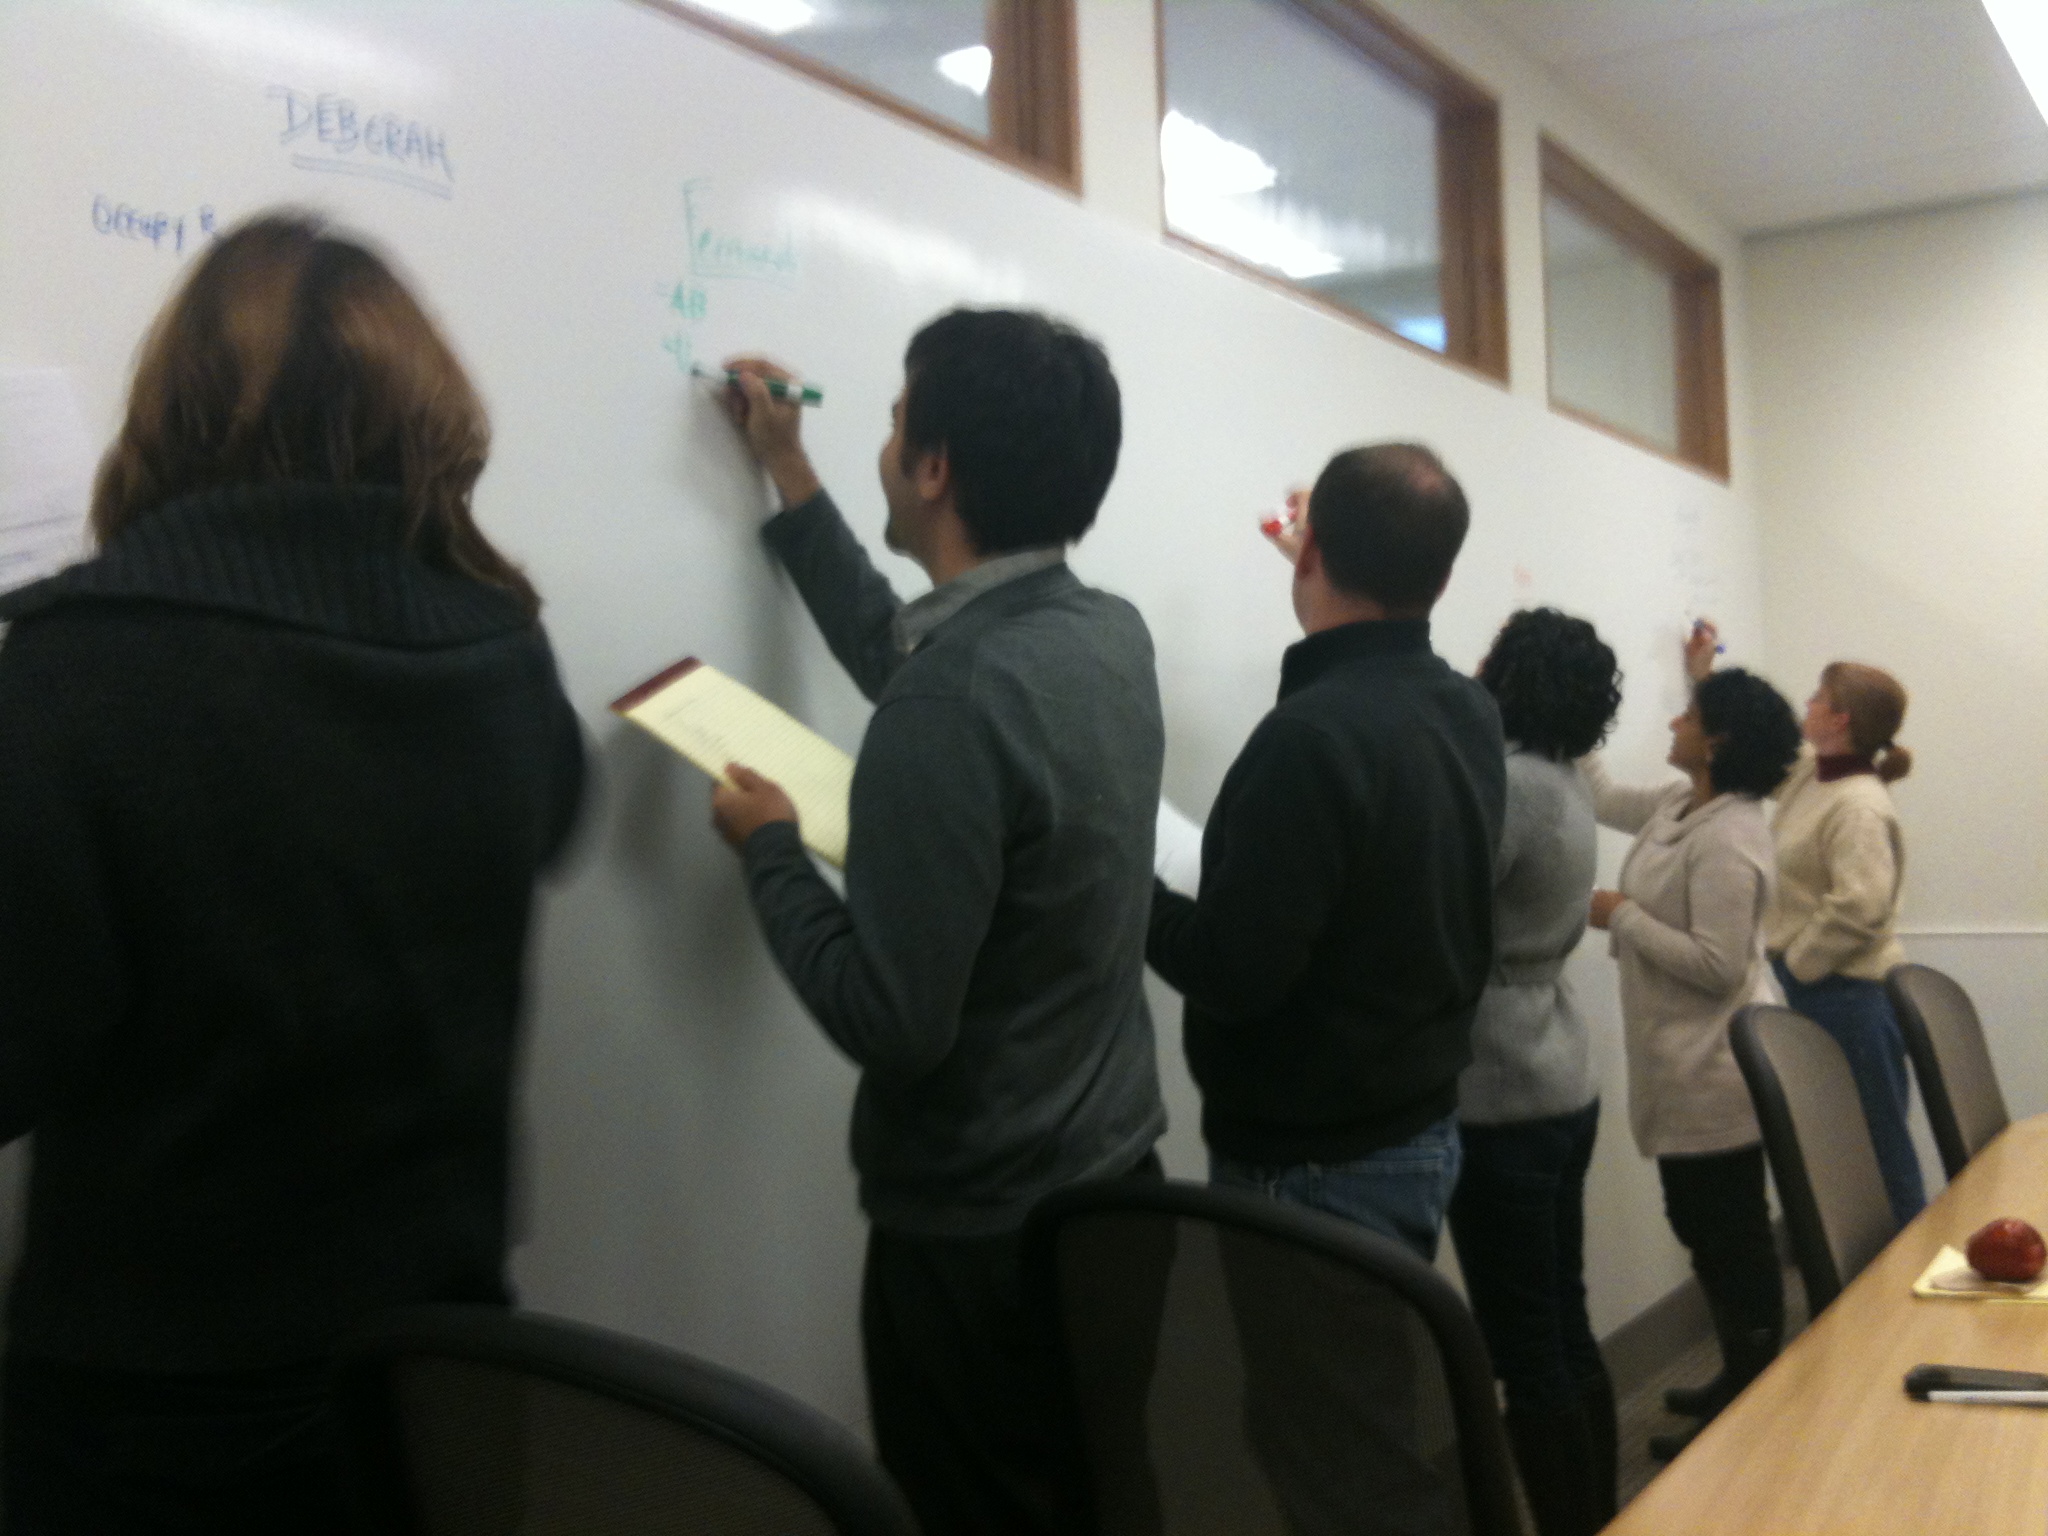 Six individuals write on a whiteboard.